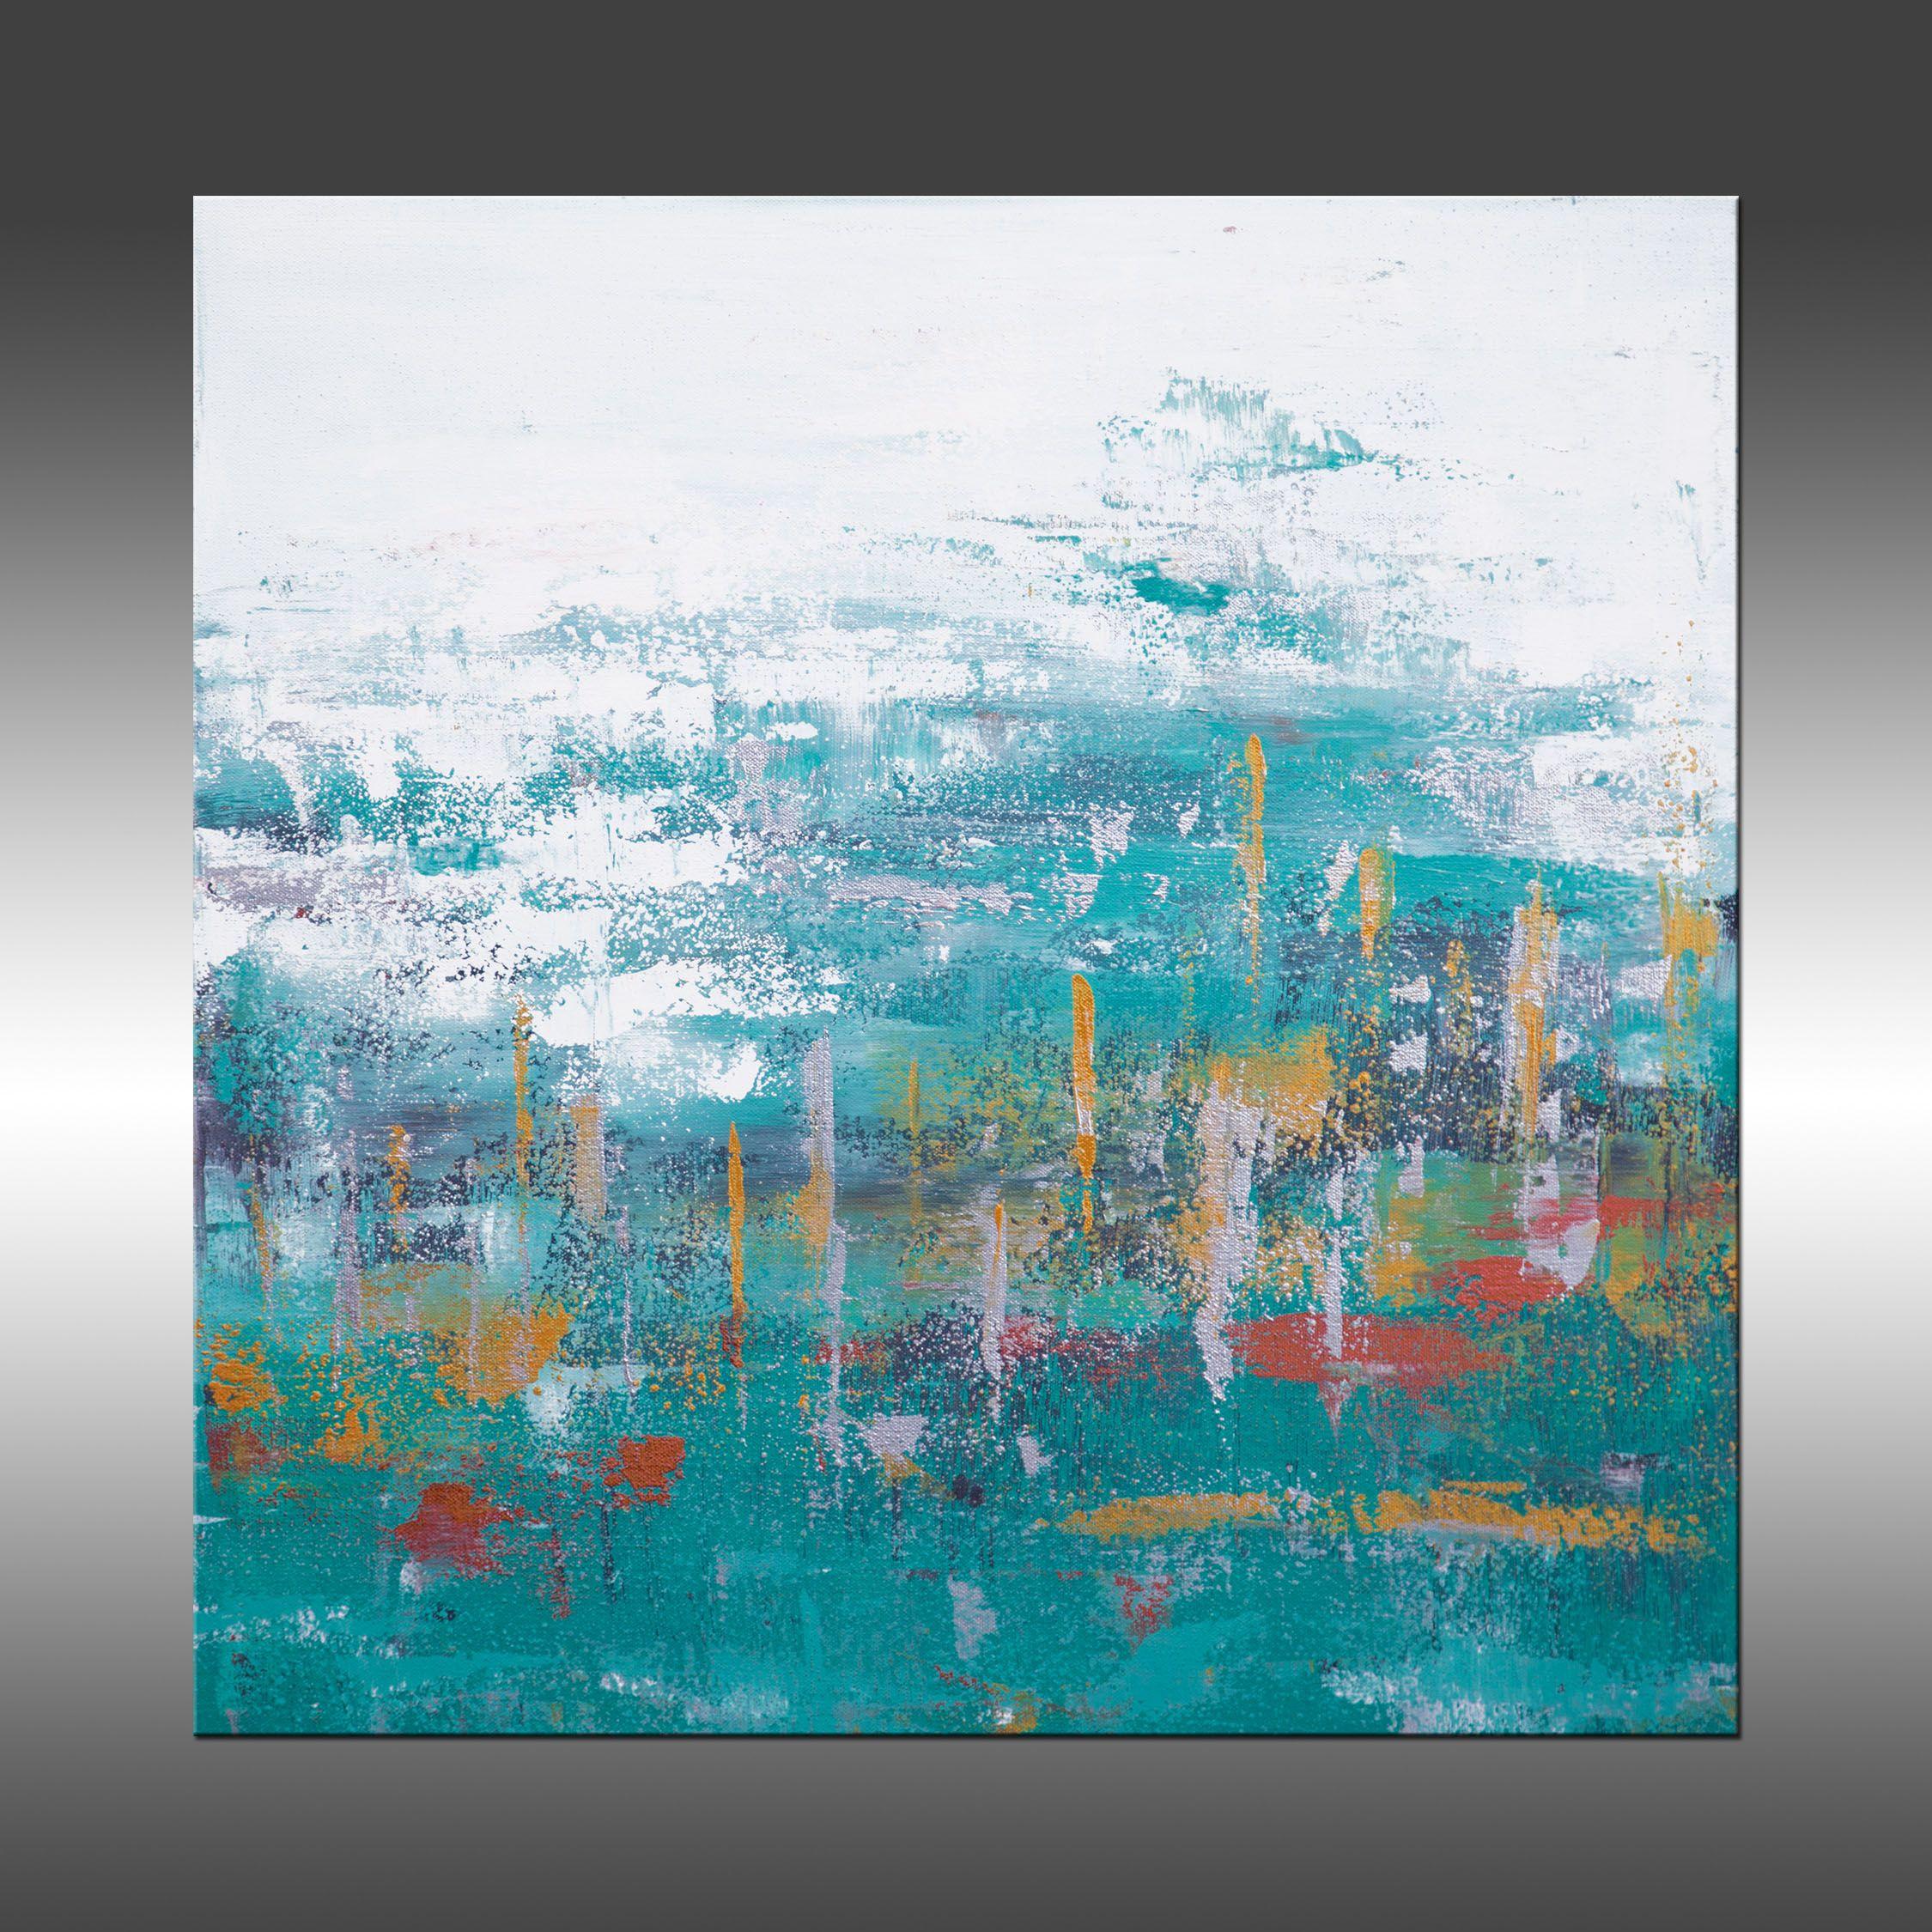 Ascension 13 is an original painting, created with acrylic paint on gallery-wrapped canvas. It has a width of 24 inches and a height of 24 inches with a depth of 1.5 inches (24x24x1.5).     The colors used in the painting are blue, gray, teal,